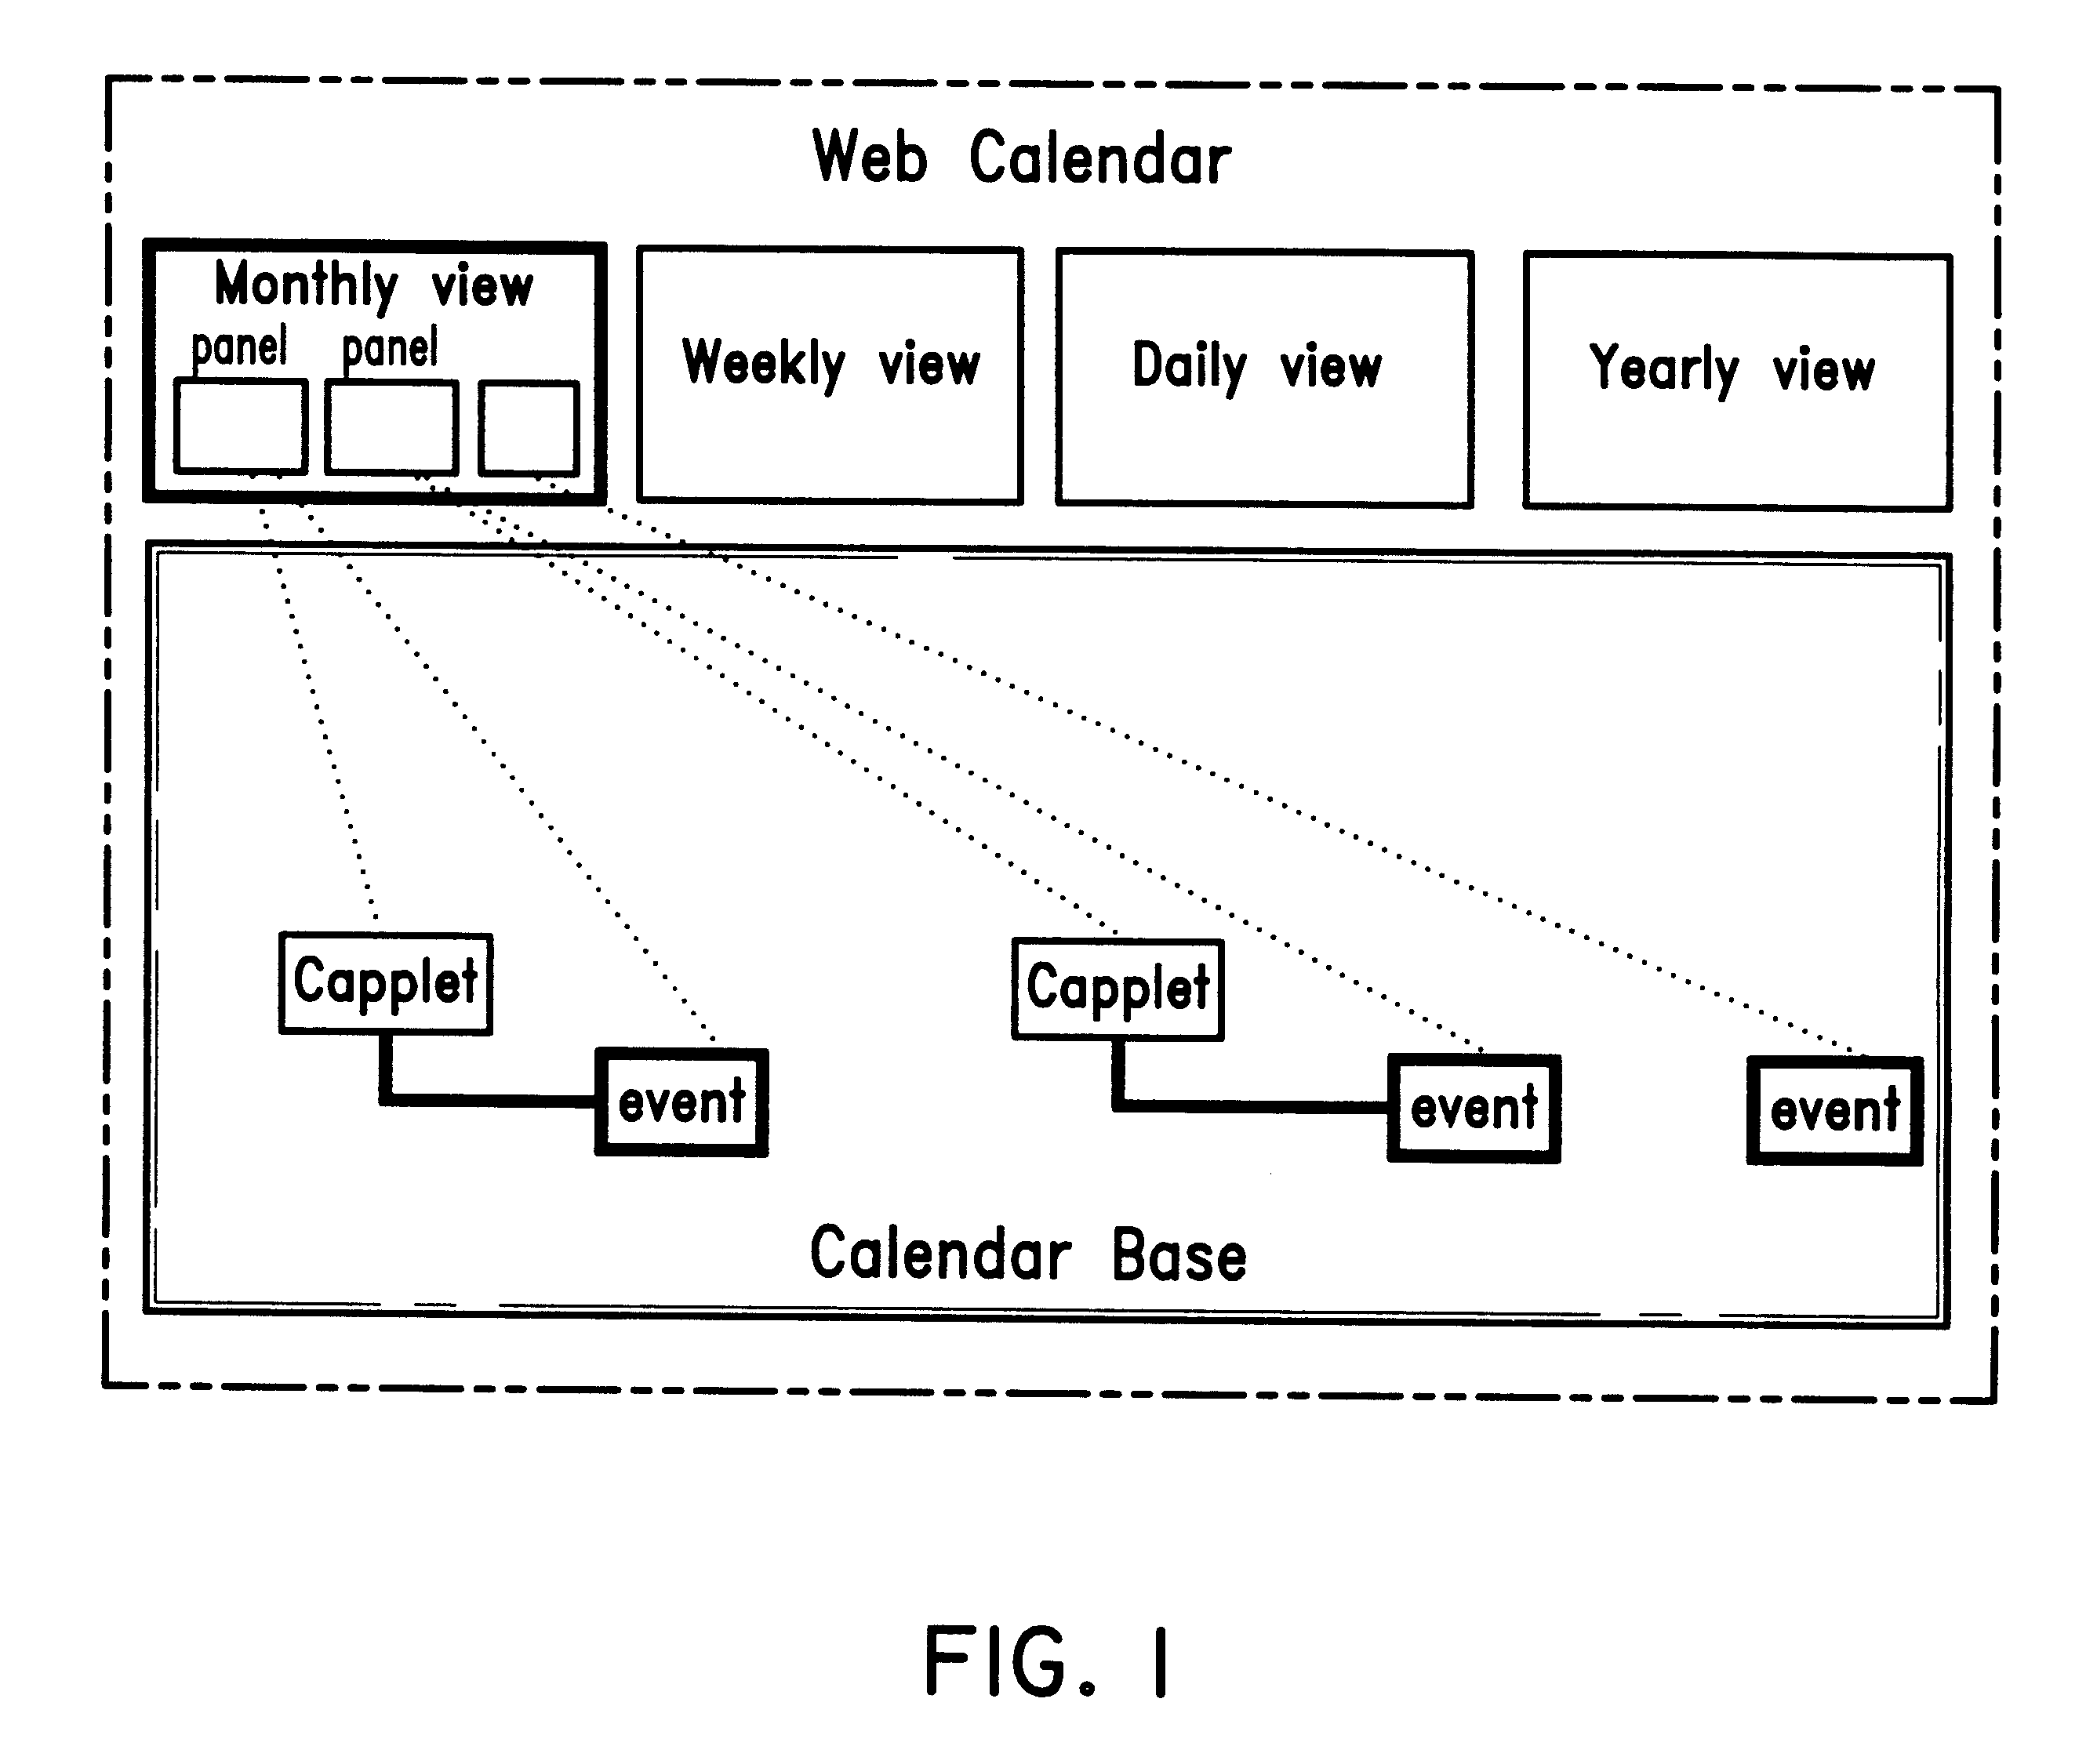 Web calendar architecture and uses thereof